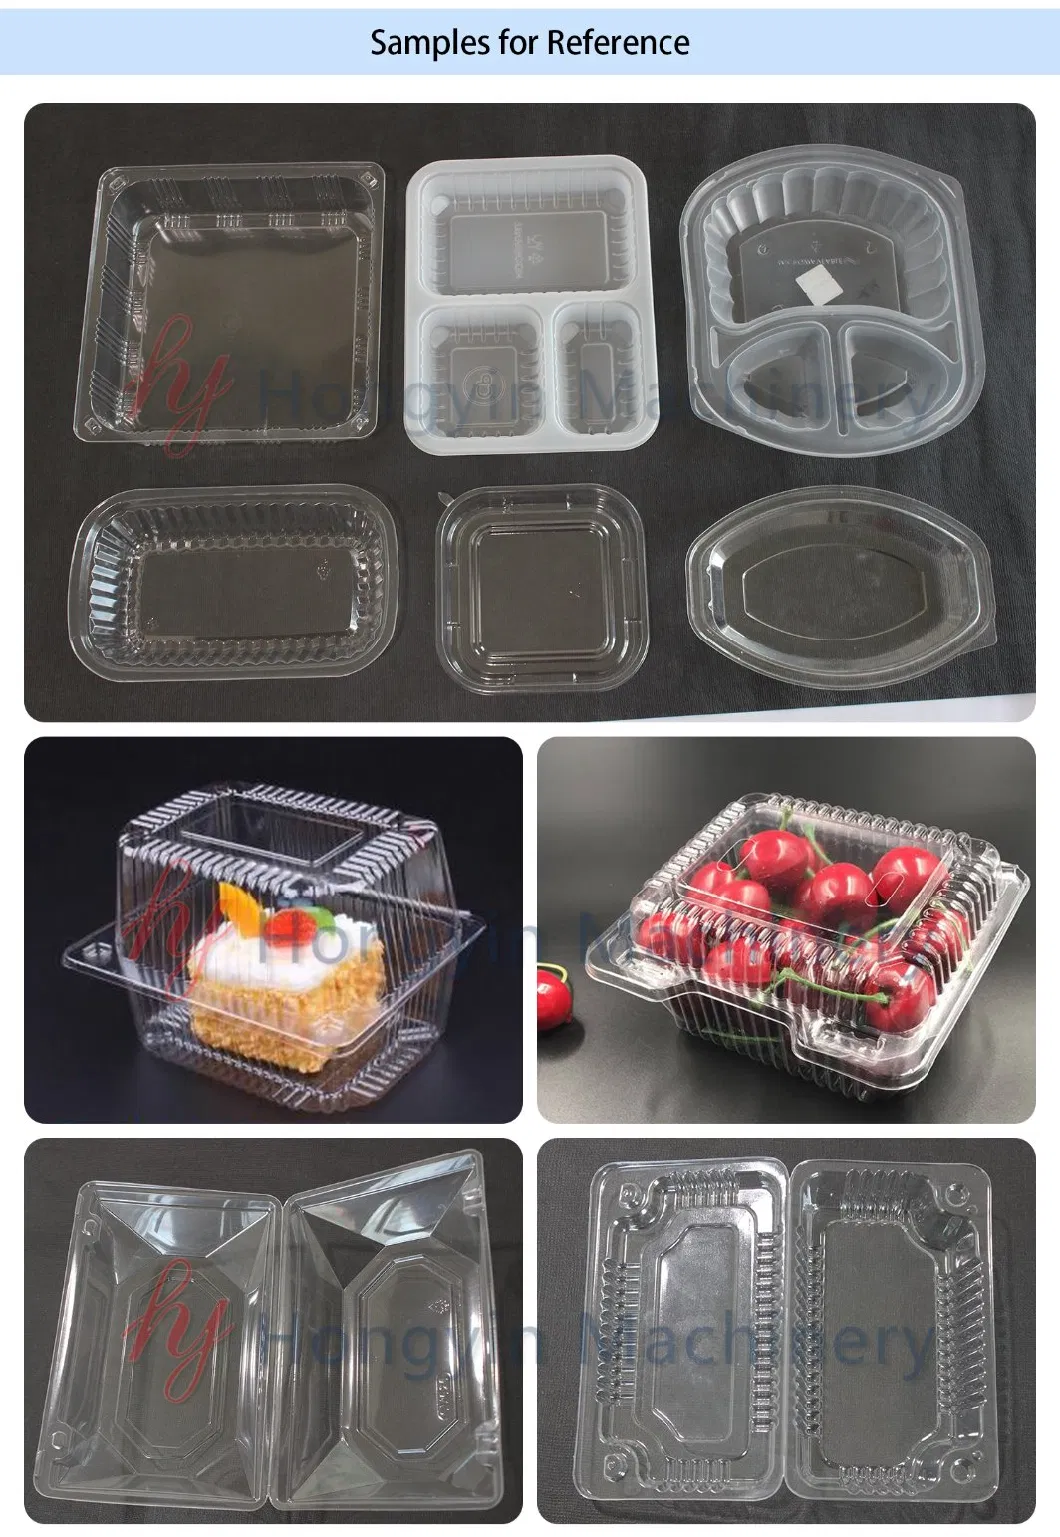 Fully Automatic Mini Plastic Tray Moulding Machine Plastic Thermoforming Machine